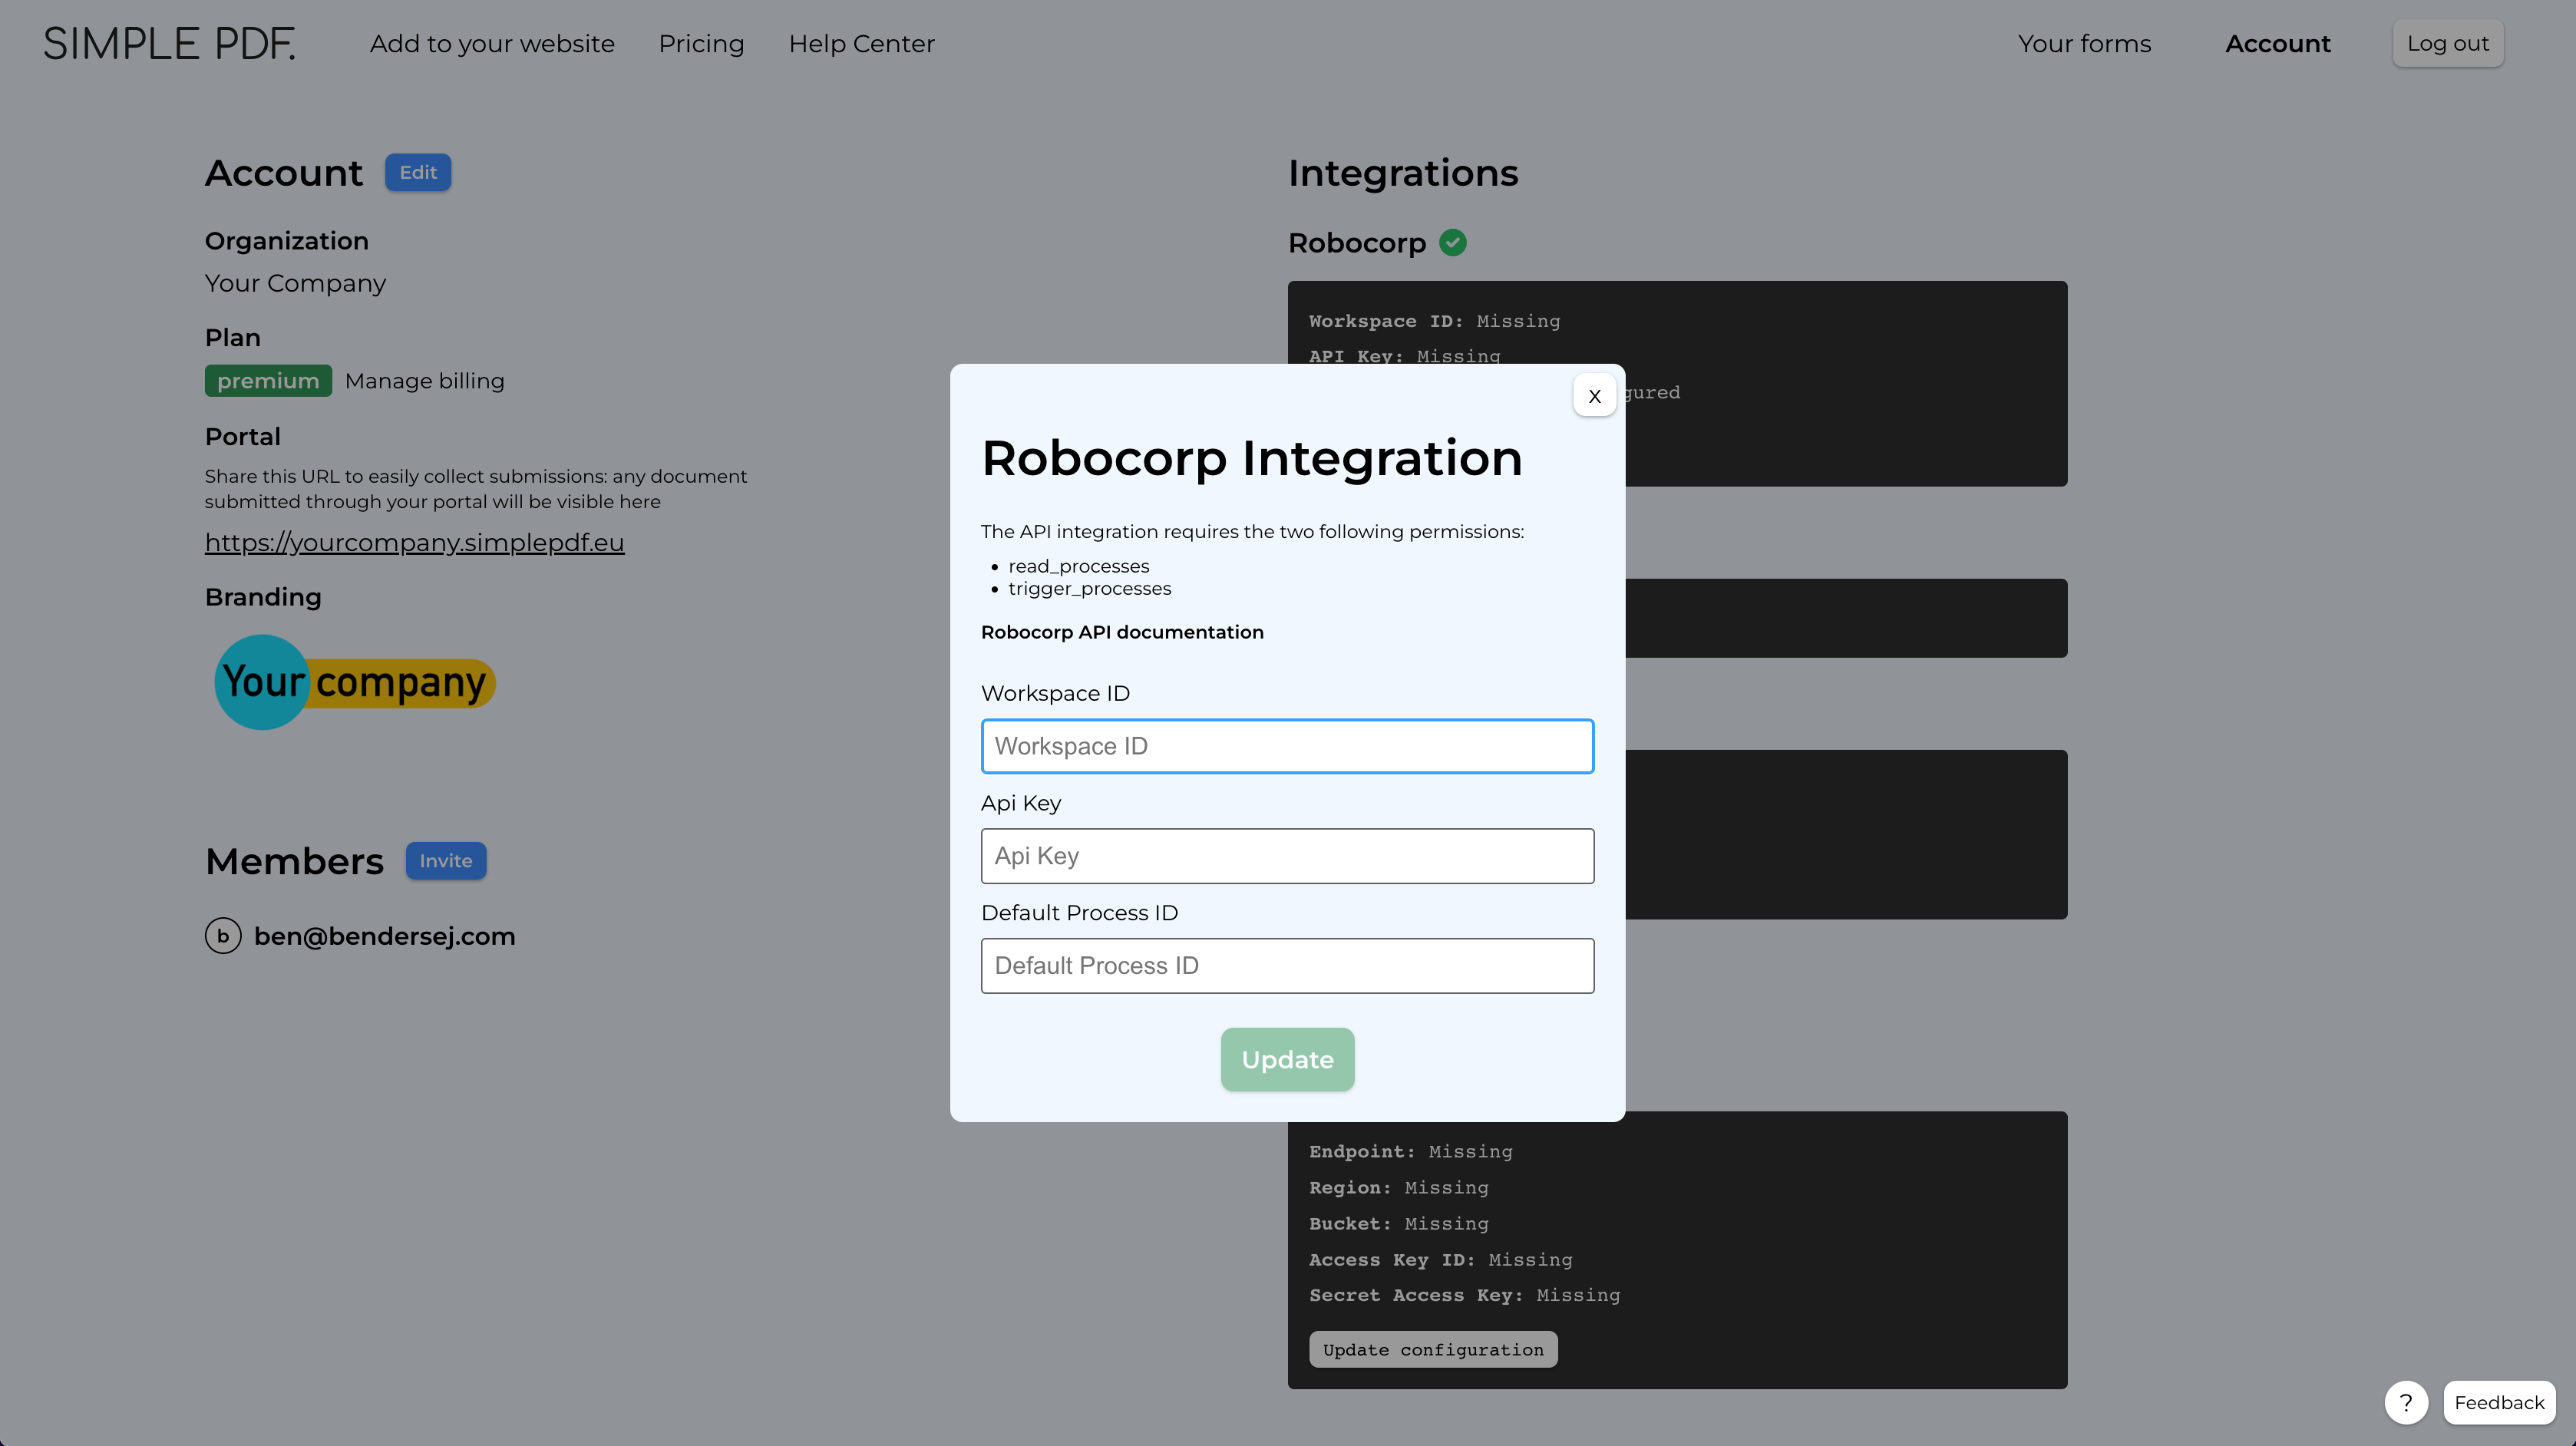 Configuring the Robocorp integration